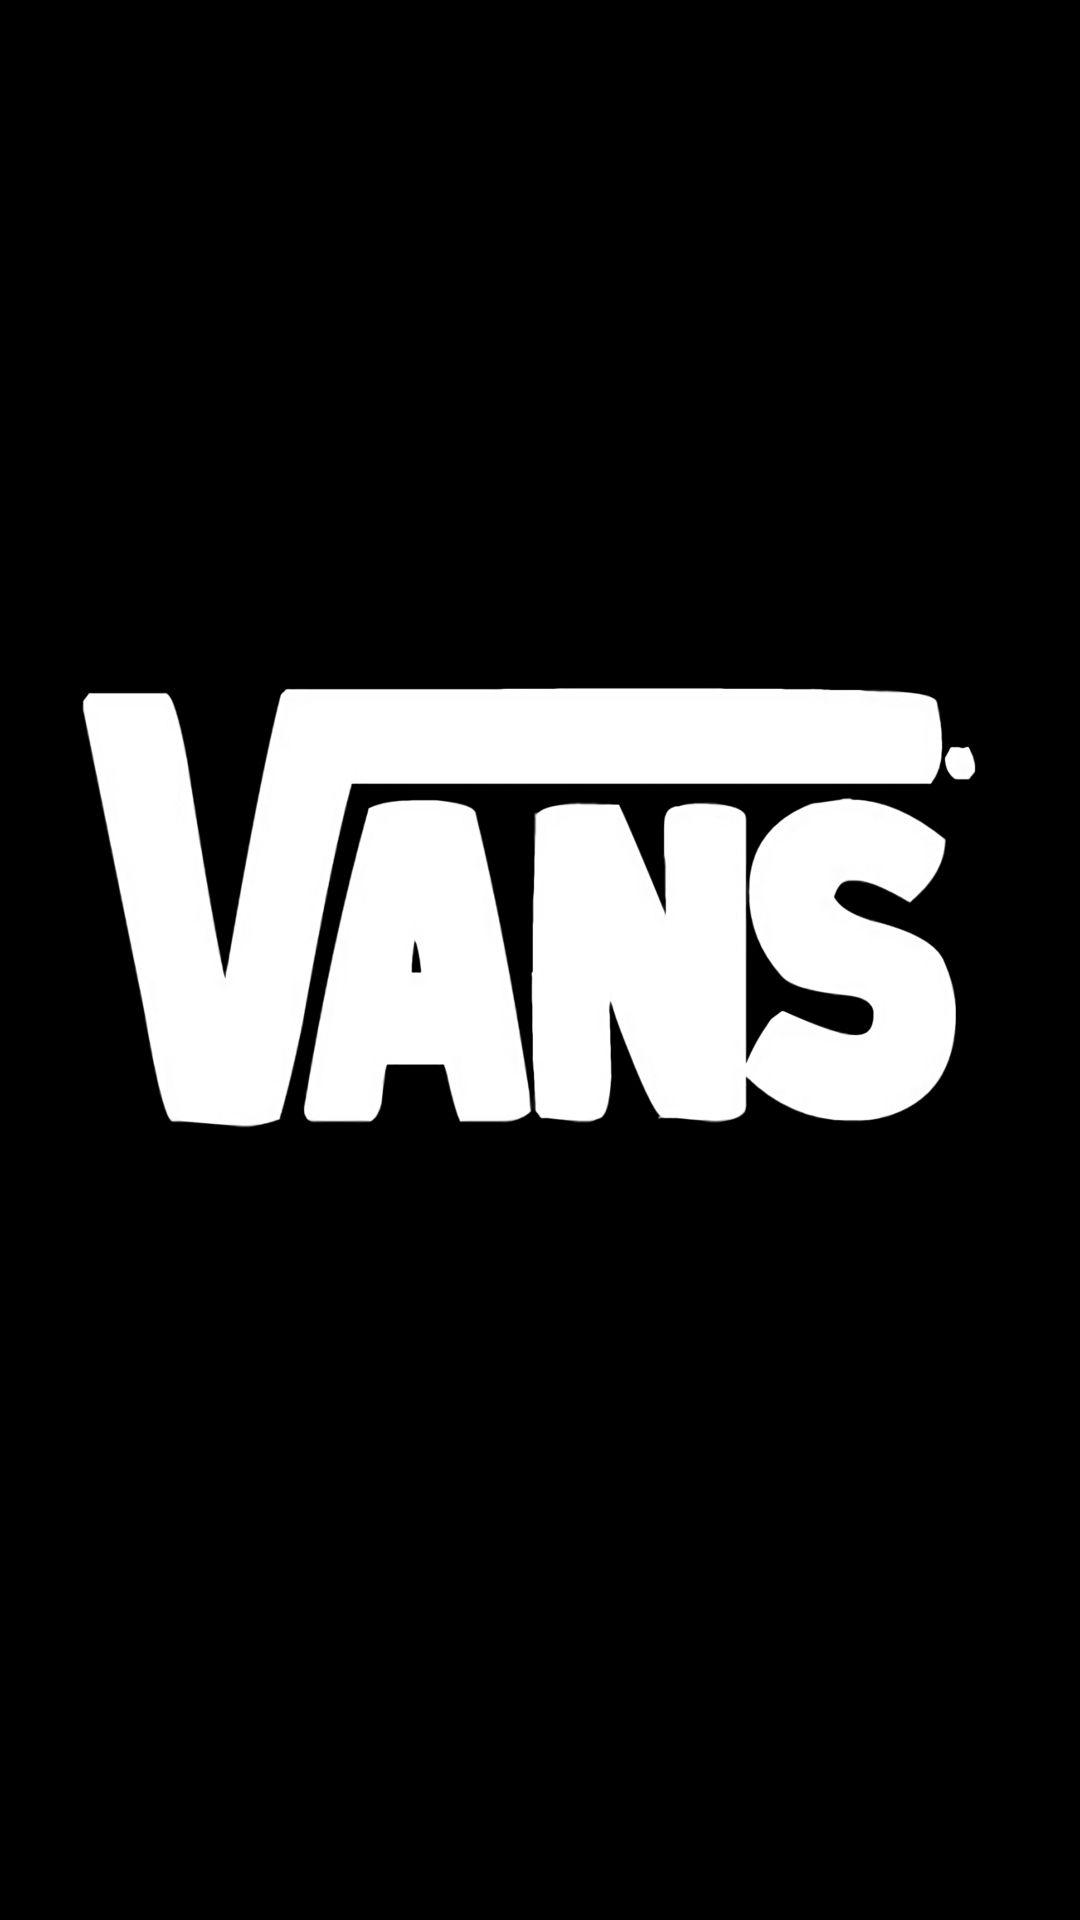 Funny of the Wall Vans Logo - Vans - Tap to see more creative wallpaper! - @mobile9 | Epics 2 ...